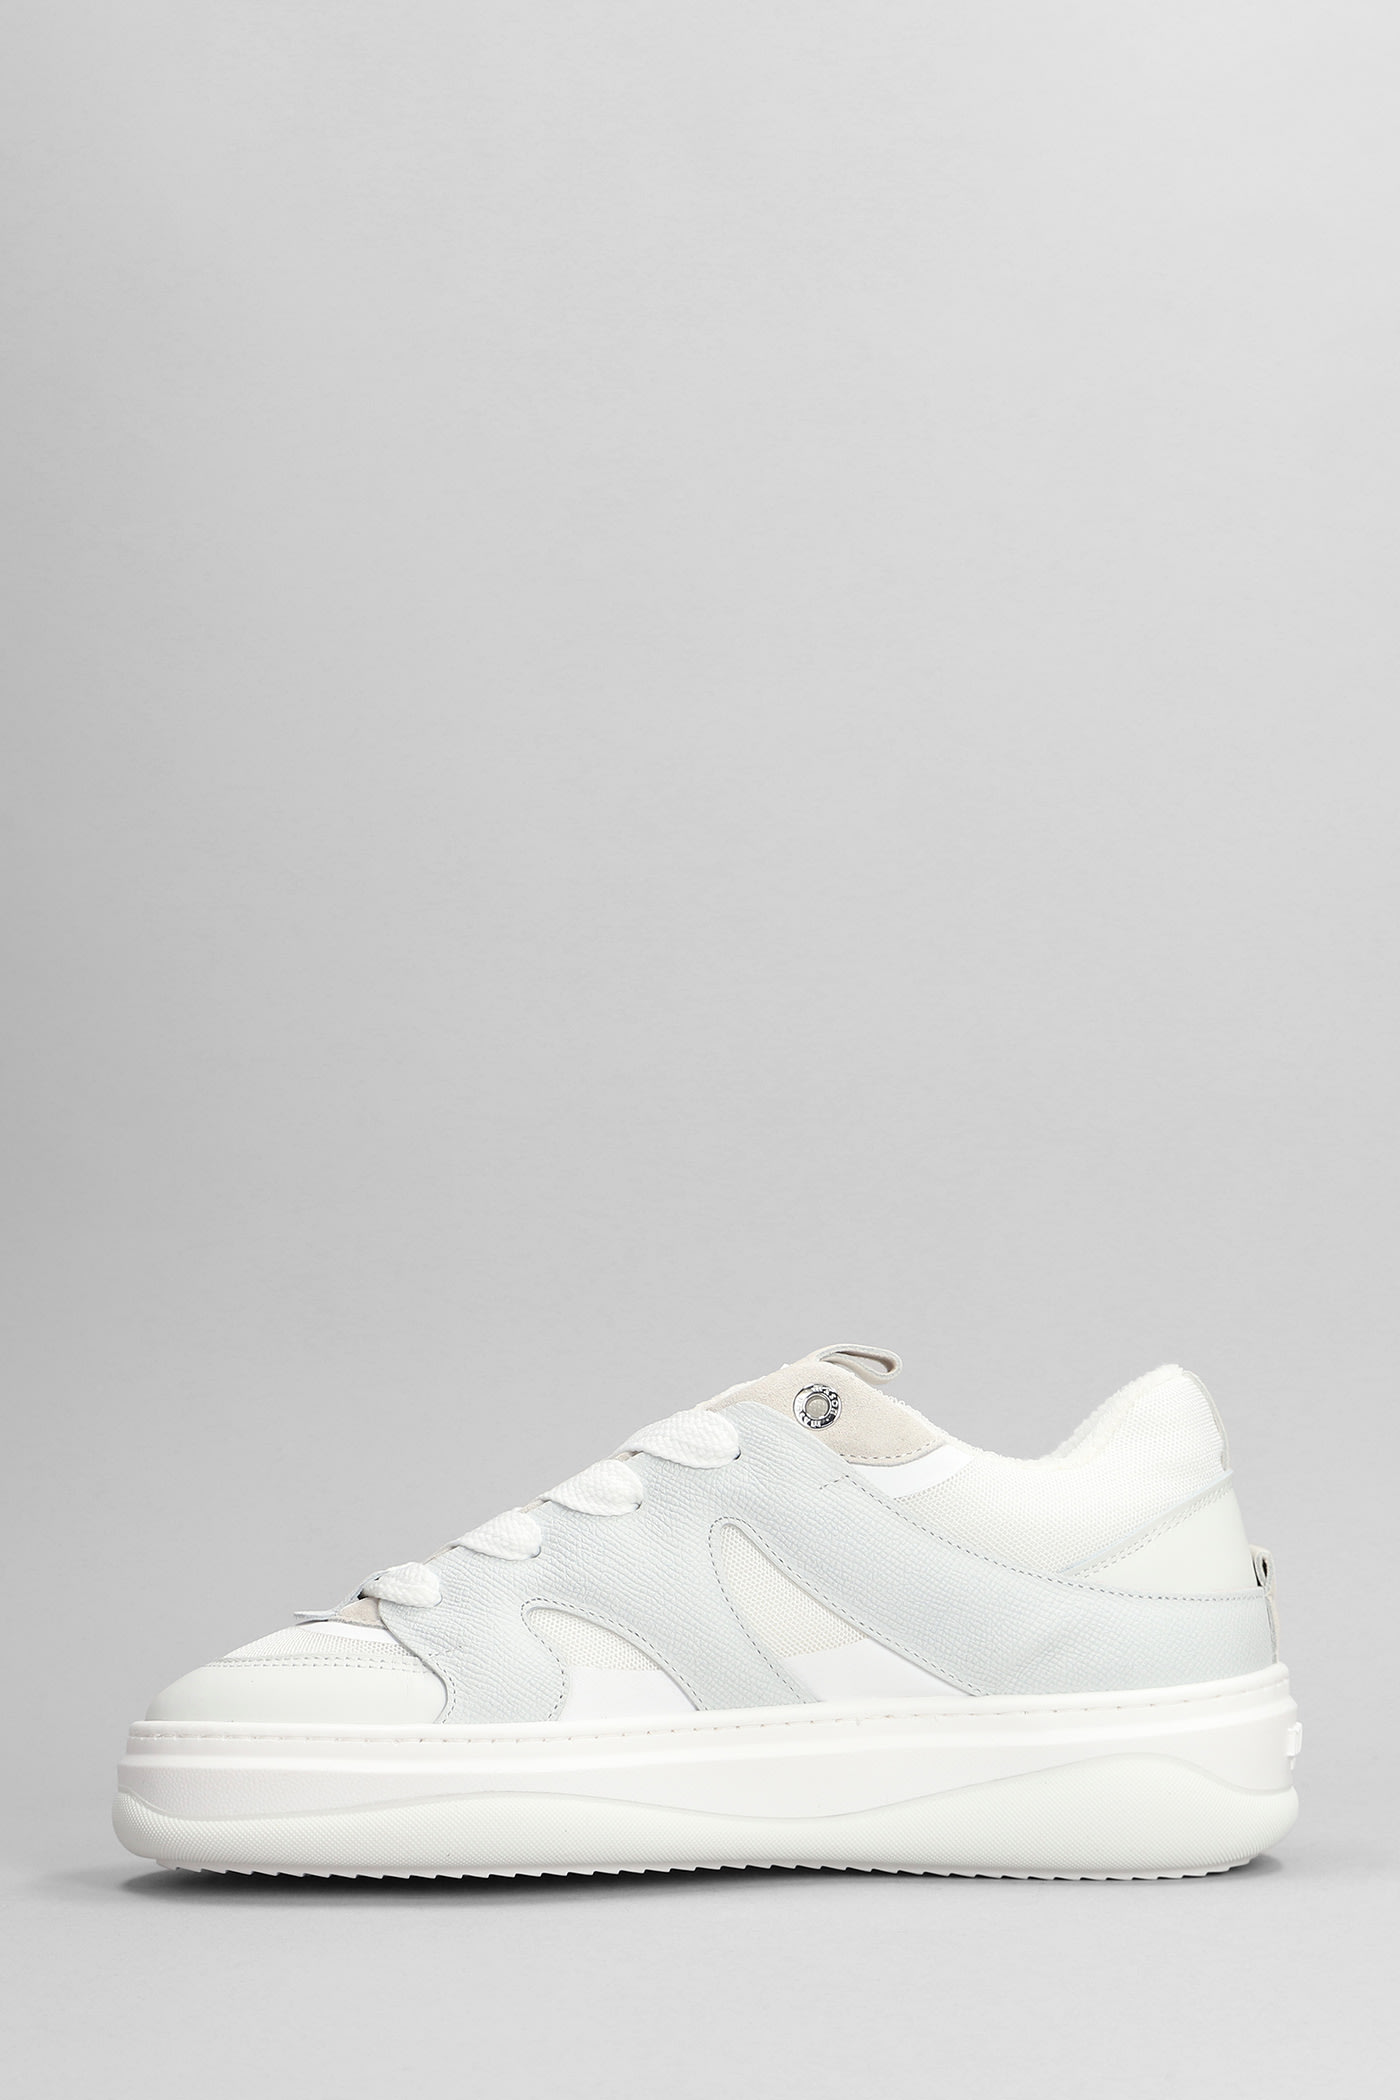 Shop Mason Garments Venice Sneakers In White Suede And Fabric